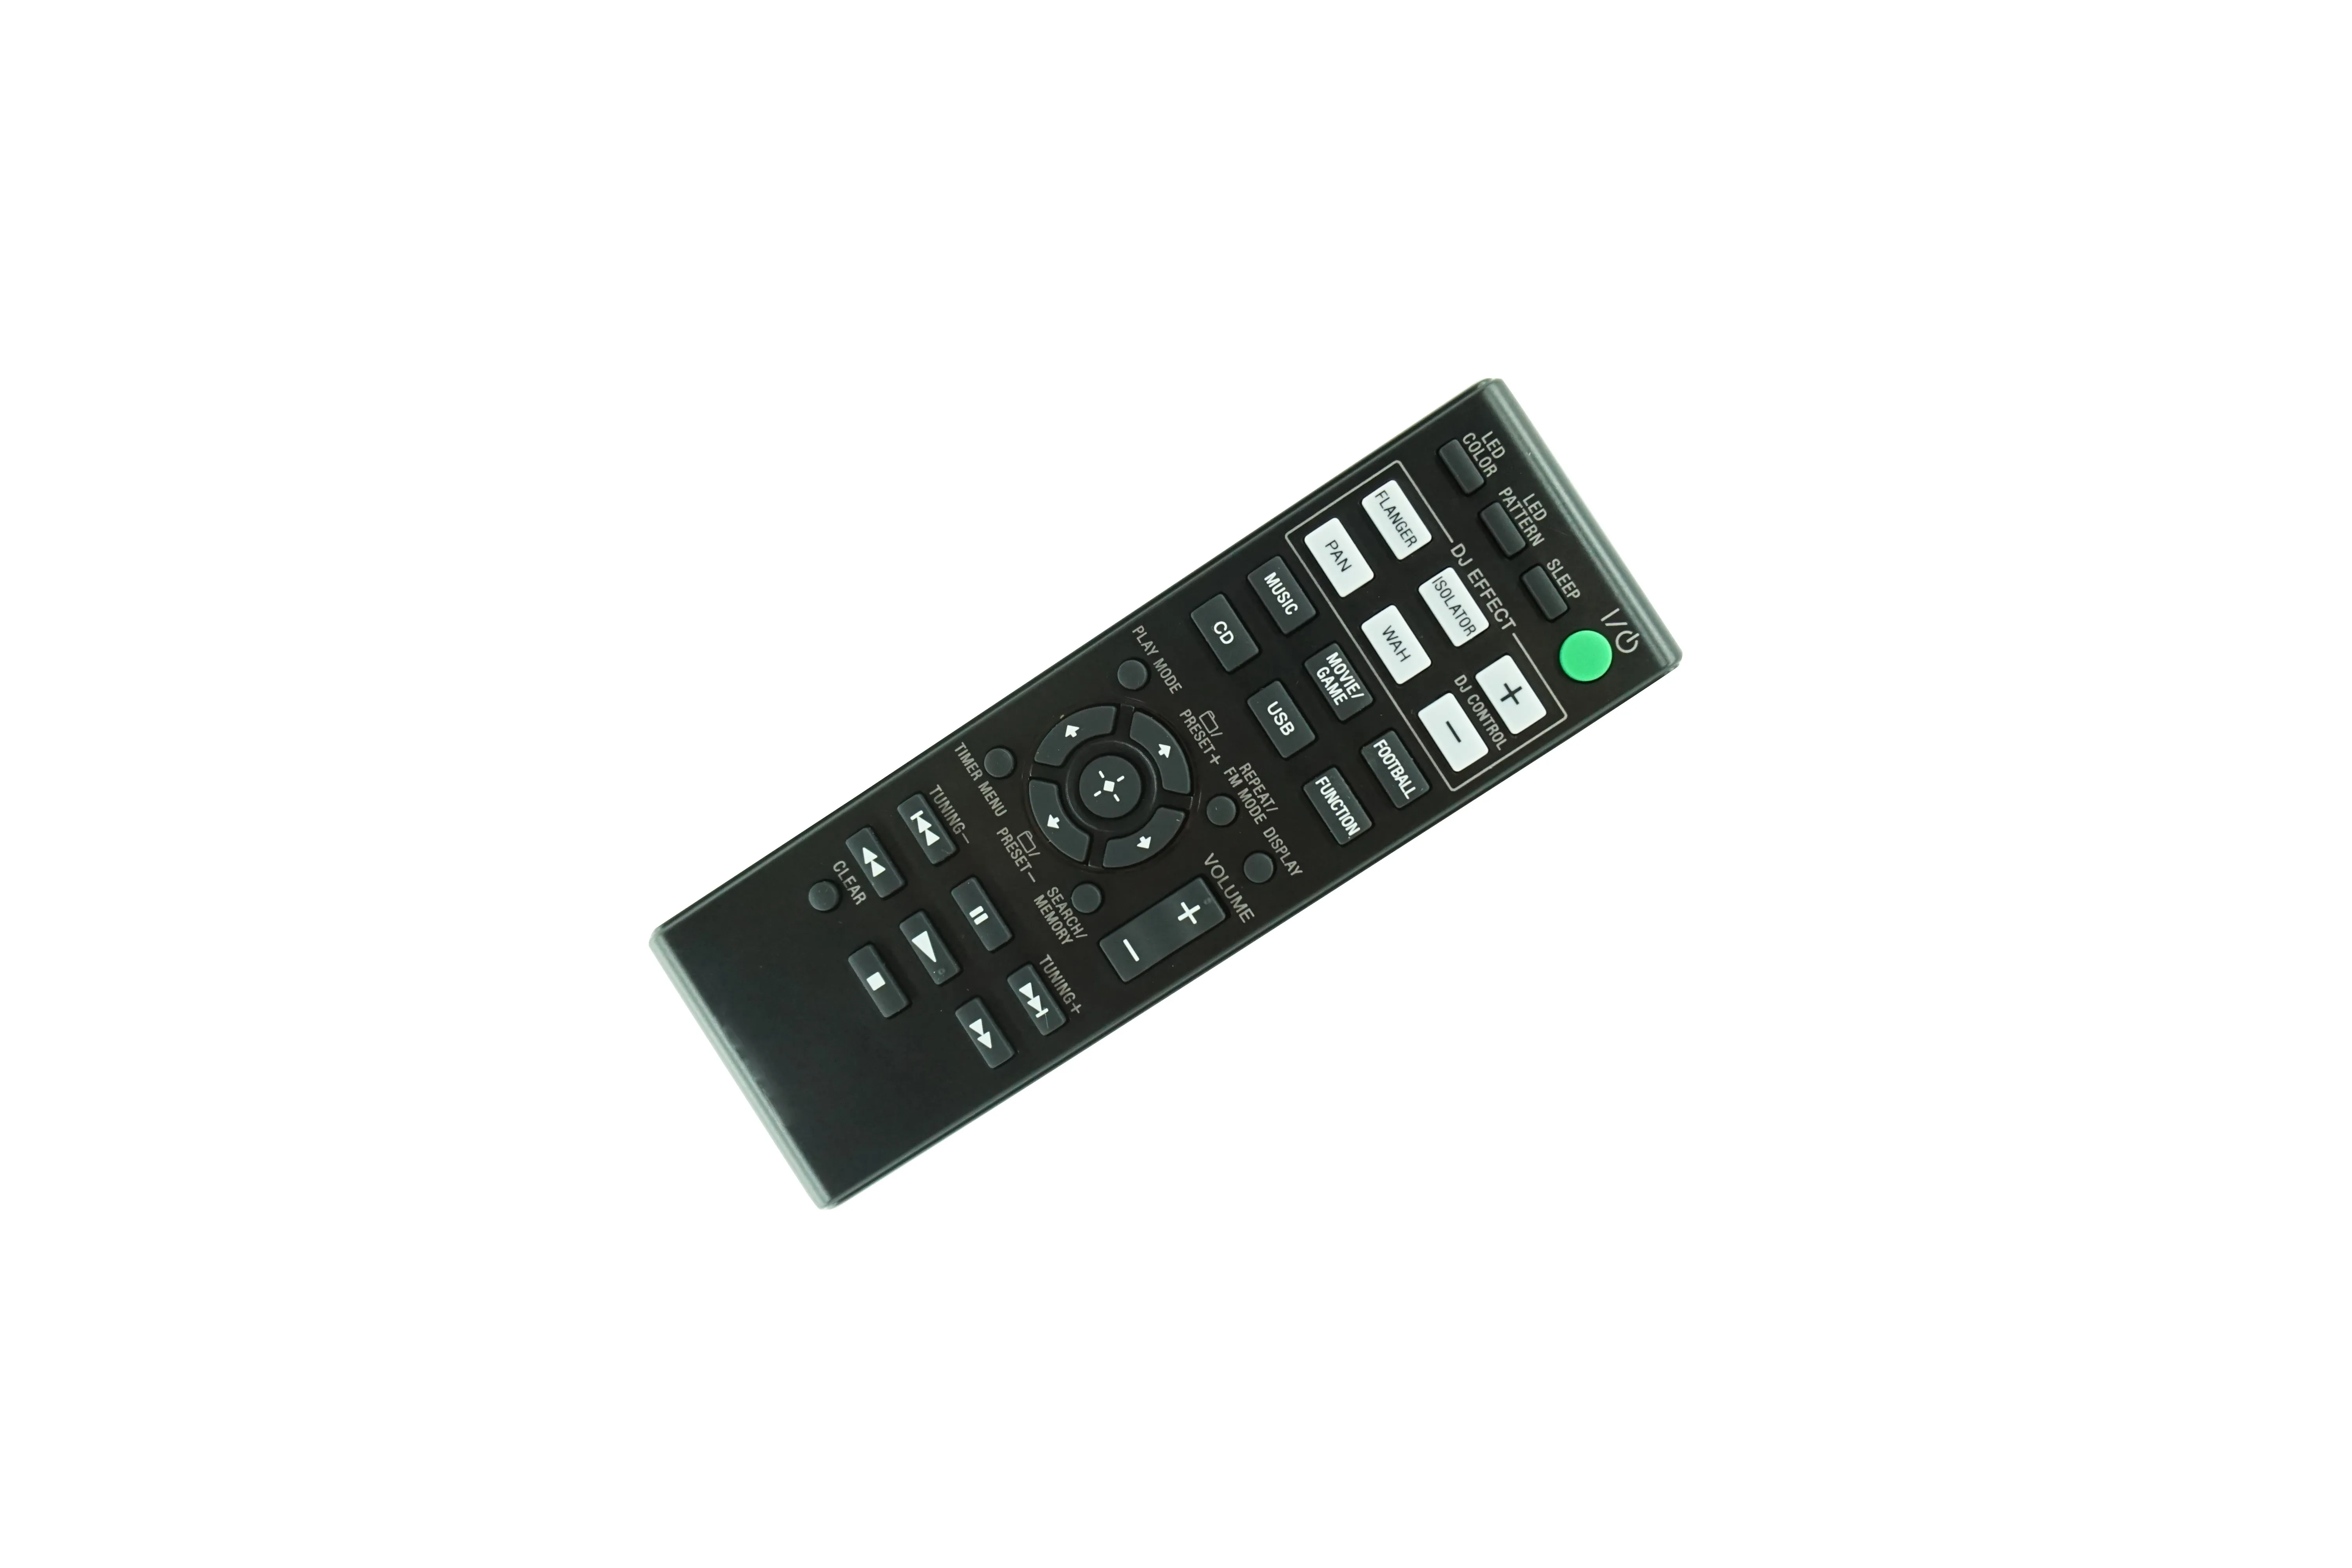 

Remote Control For Sony HCD-GPX9 CMT-GPX9DAB HCD-GPX6 RM-AMU163 MHC-GPX7G MHC-GPX33 MHC-GPX55 Mini Hi-Fi Music Home Audio system